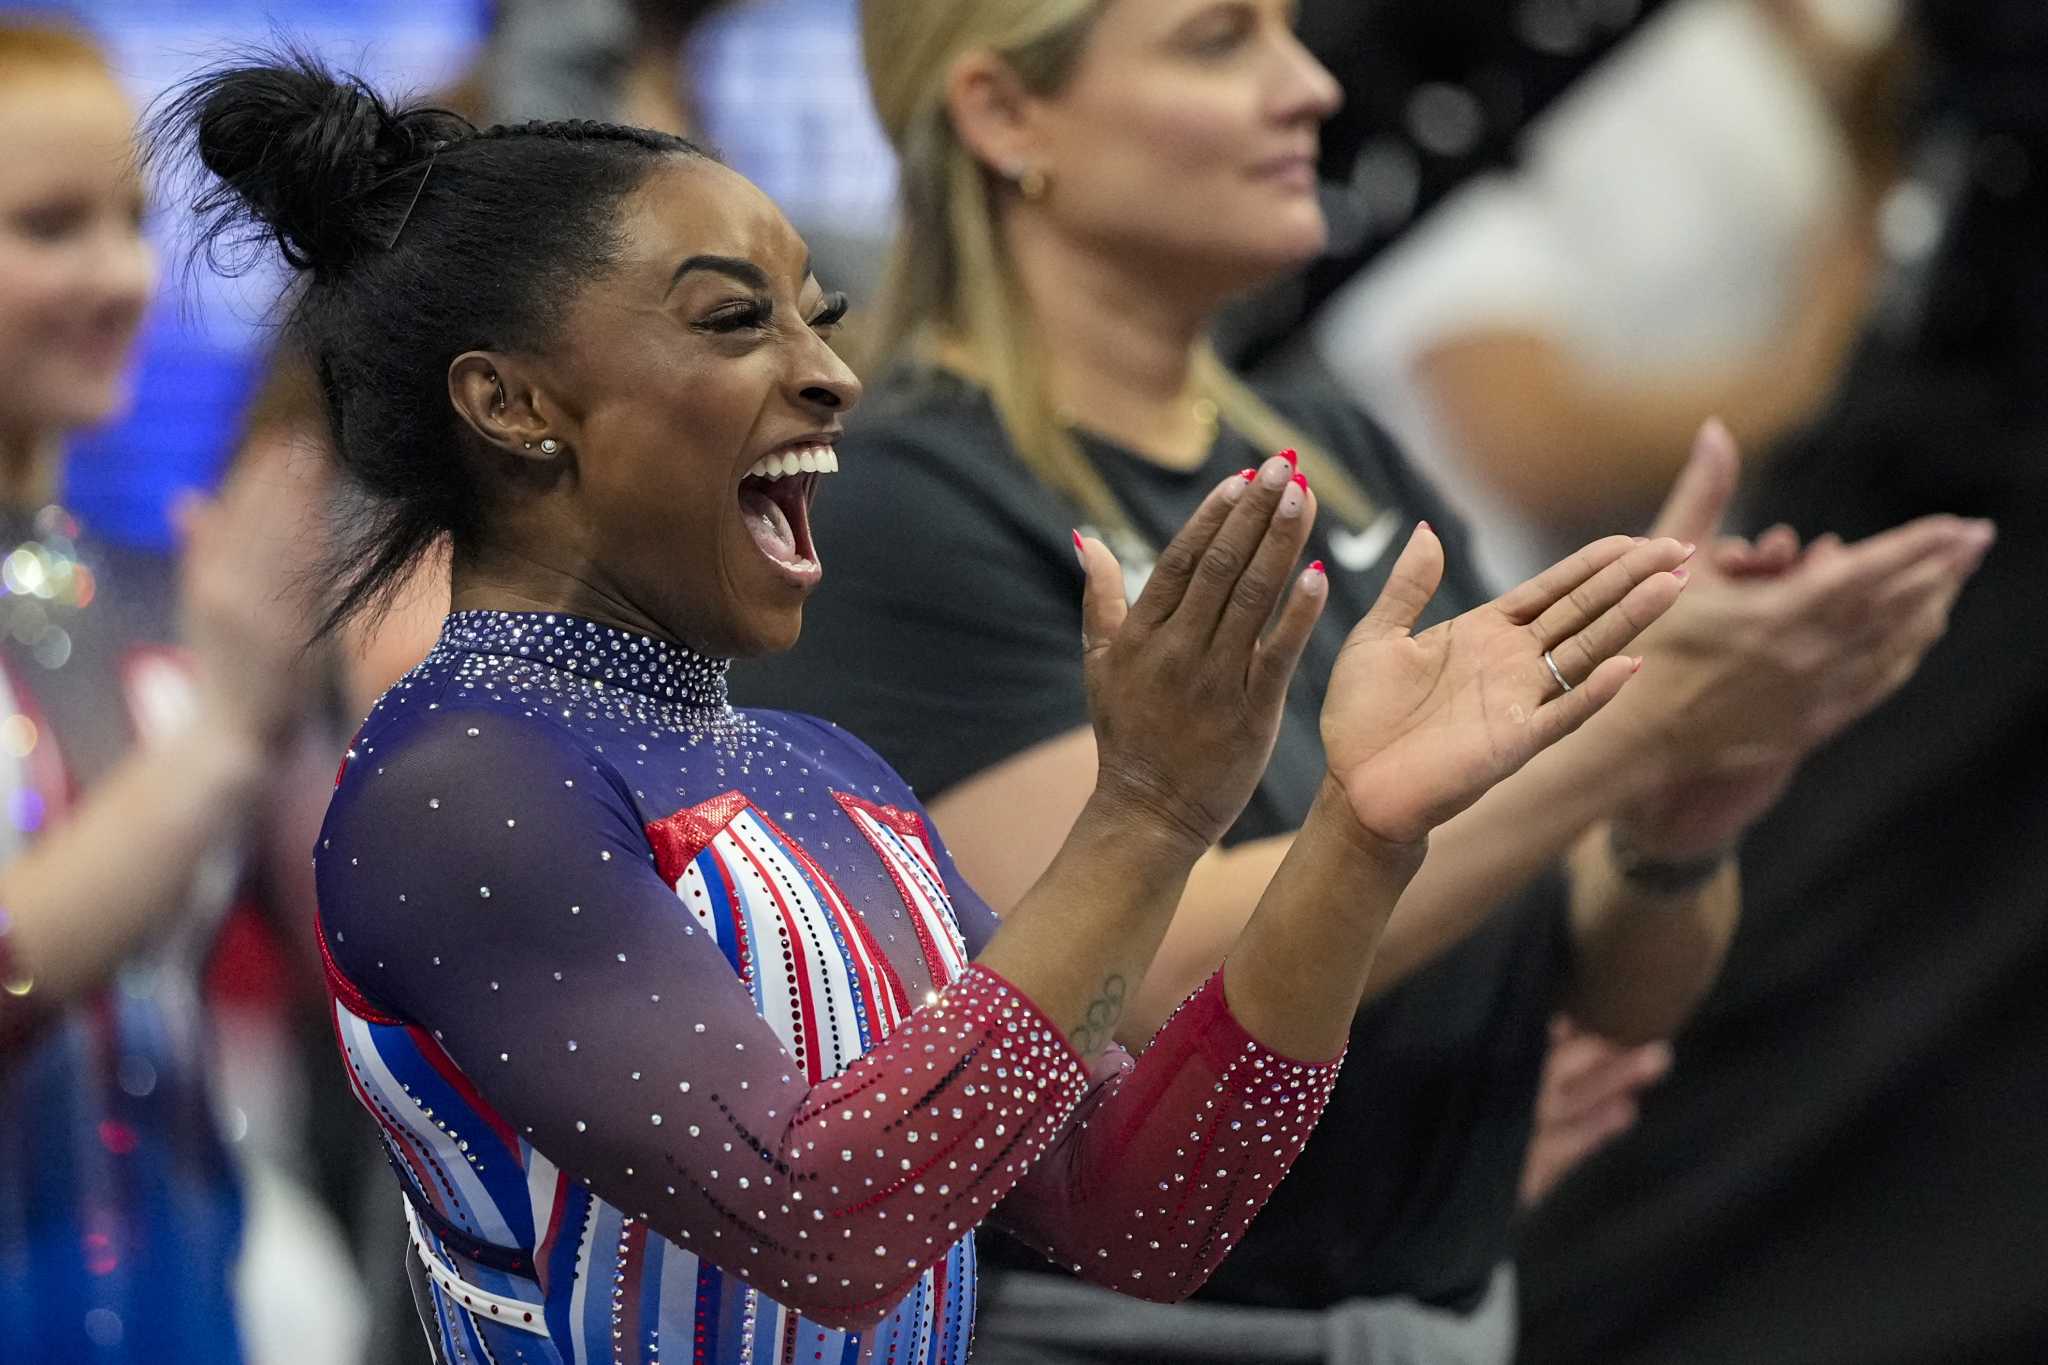 Simone Biles has moved past Tokyo. If critics can't, she says that's their problem, not hers